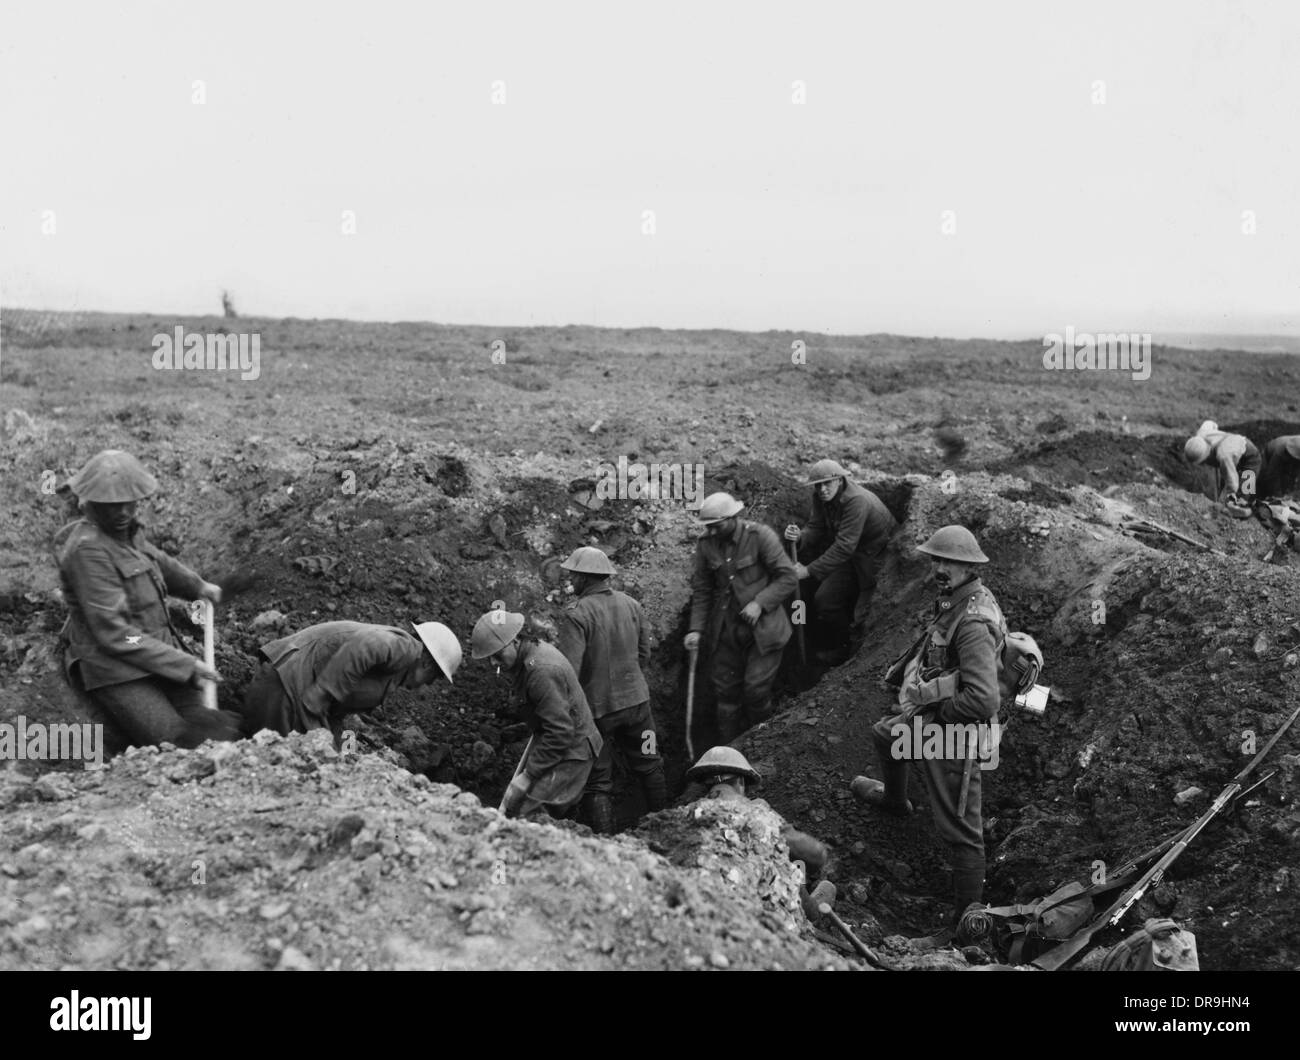 Flers-Courcelette 1916 Stock Photo